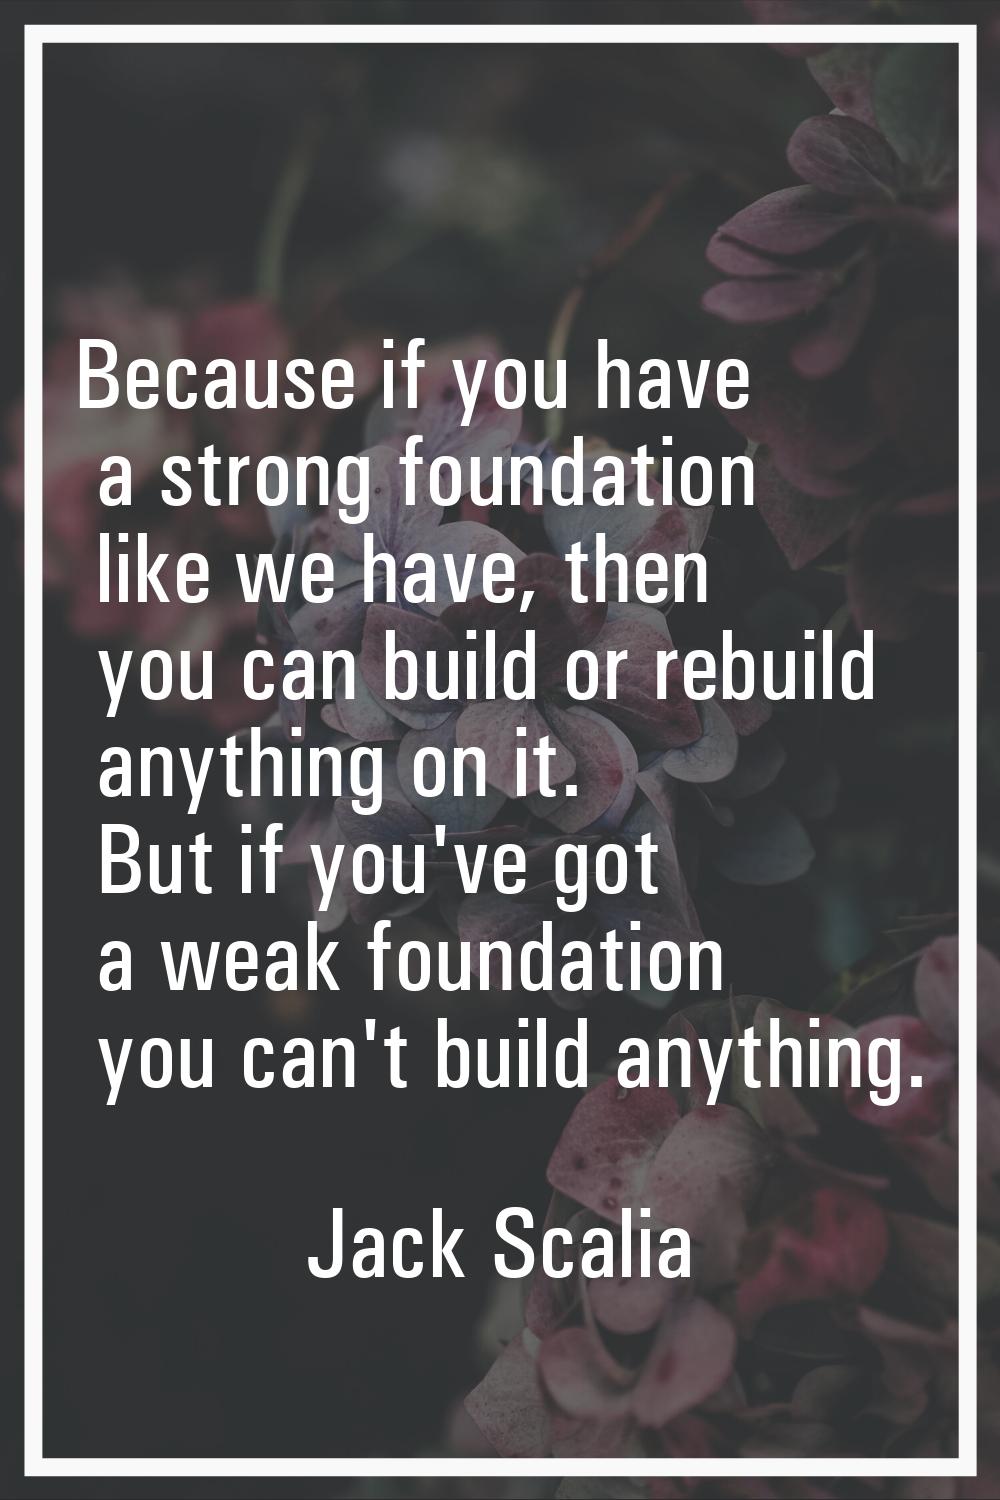 Because if you have a strong foundation like we have, then you can build or rebuild anything on it.